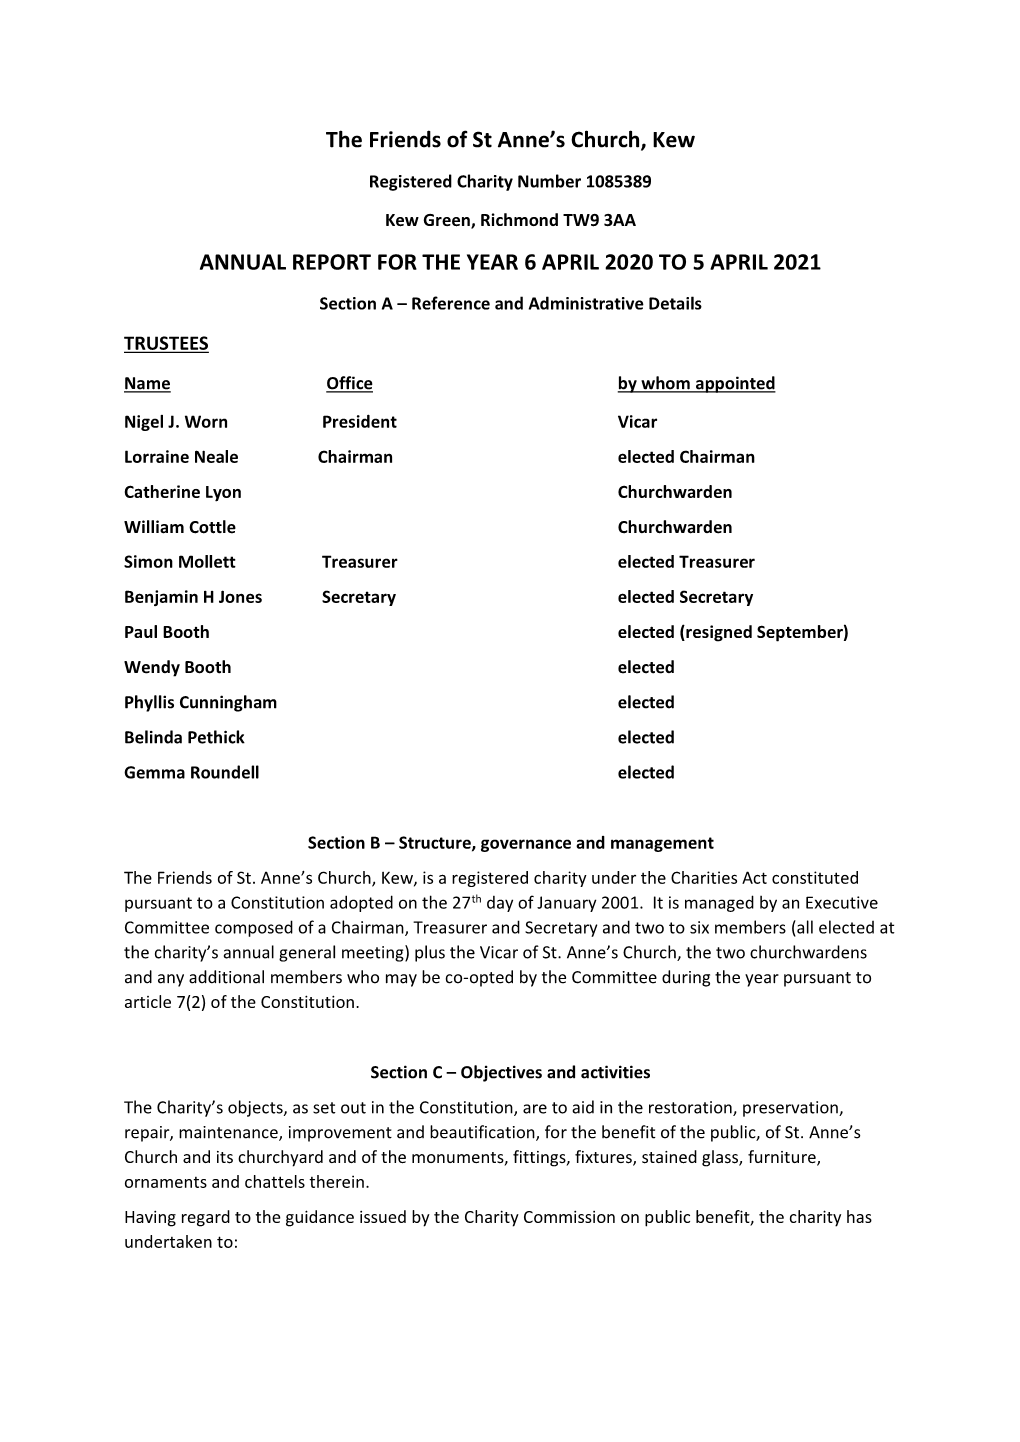 The Friends of St Anne's Church, Kew ANNUAL REPORT for the YEAR